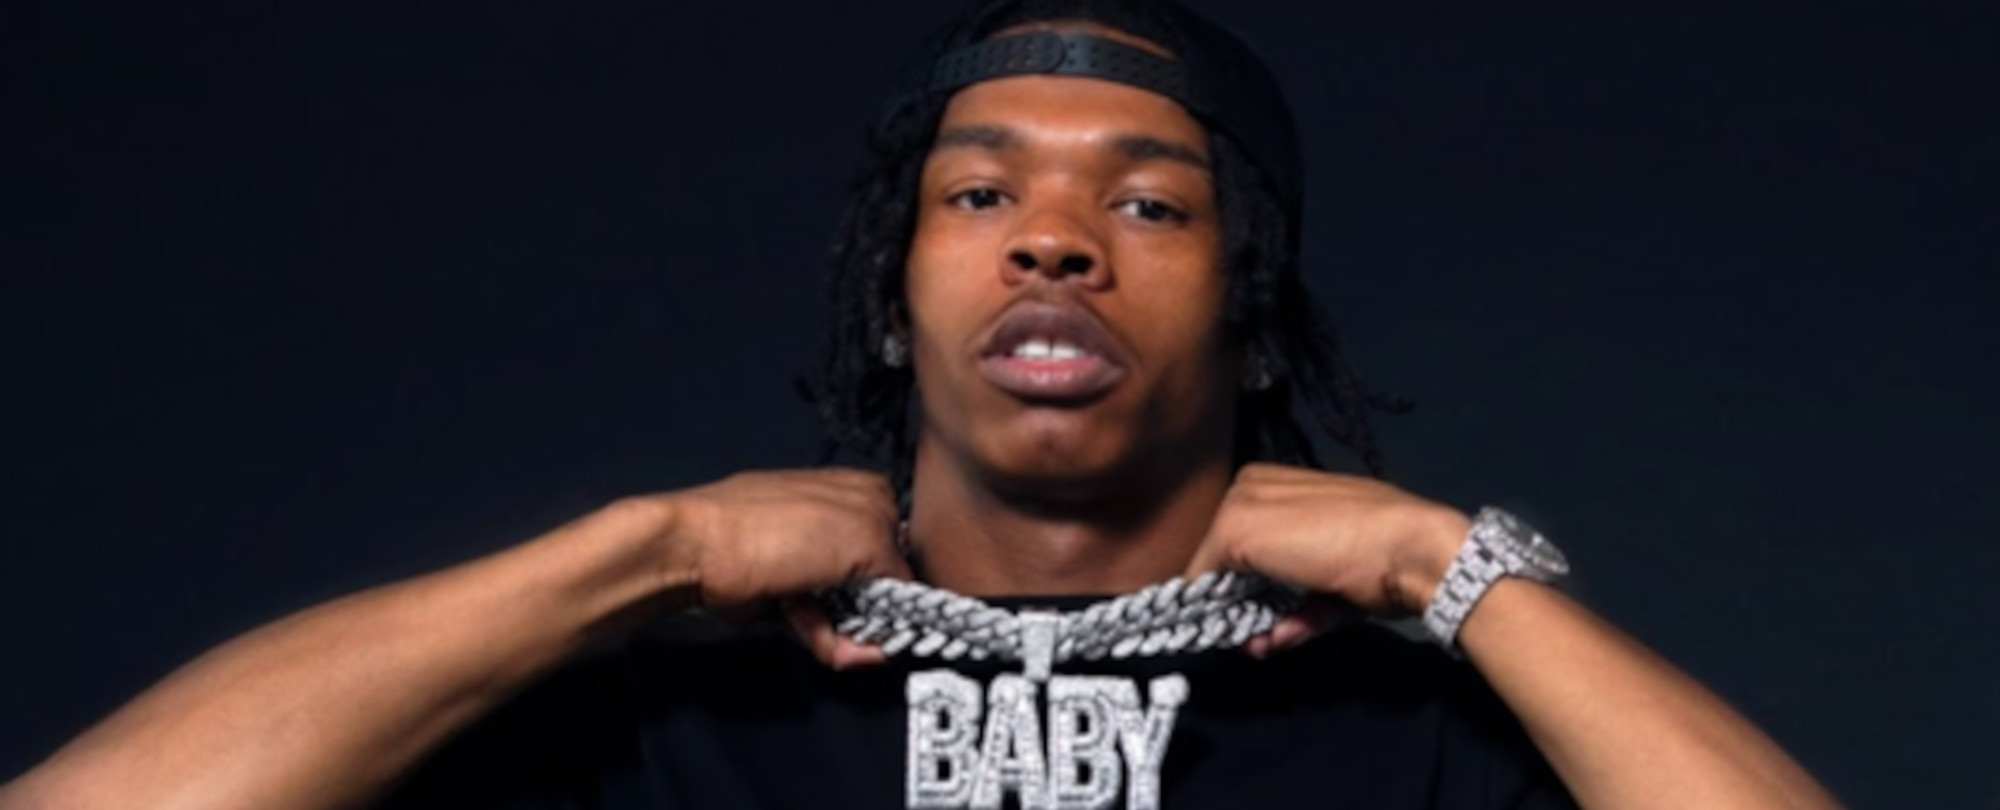 Paris Police Release Rapper Lil Baby From Custody with a Drug Fine ...